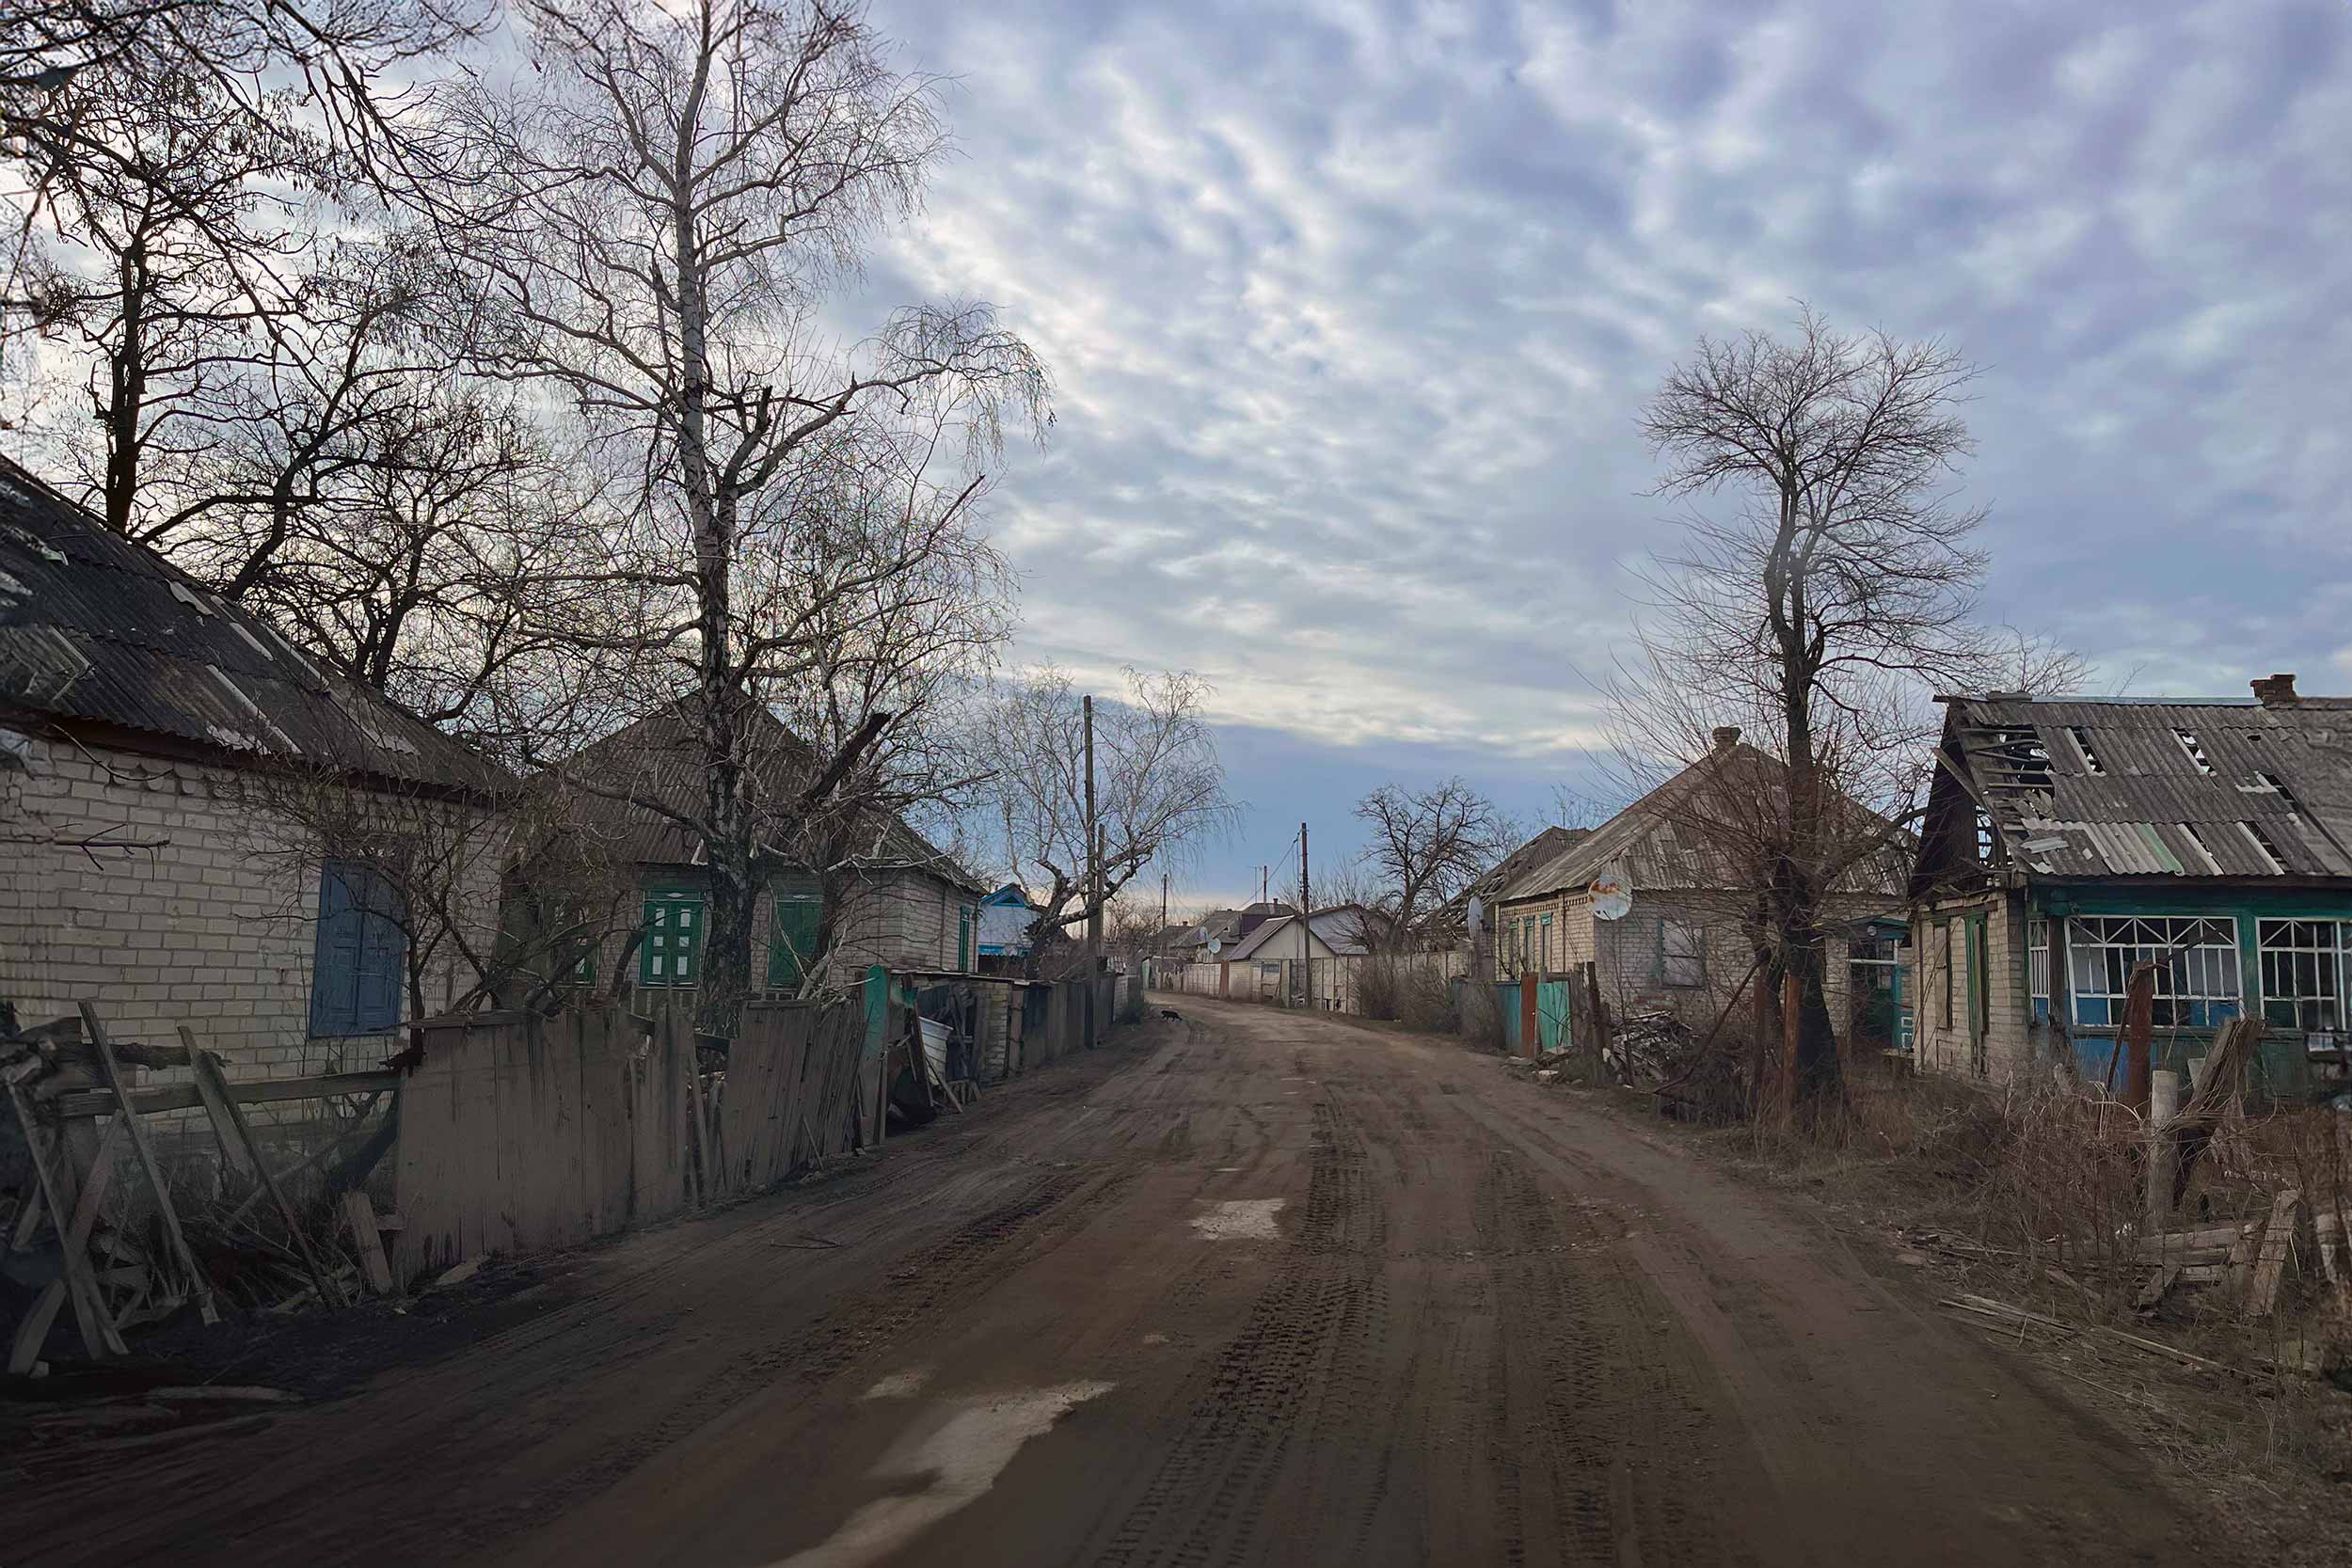 Emptied Village. Outside of Lyman, in the Donetsk region, the frontline is 10 kilometres away, and villages like Yampil and others are sparsely populated. © Anthony Borden